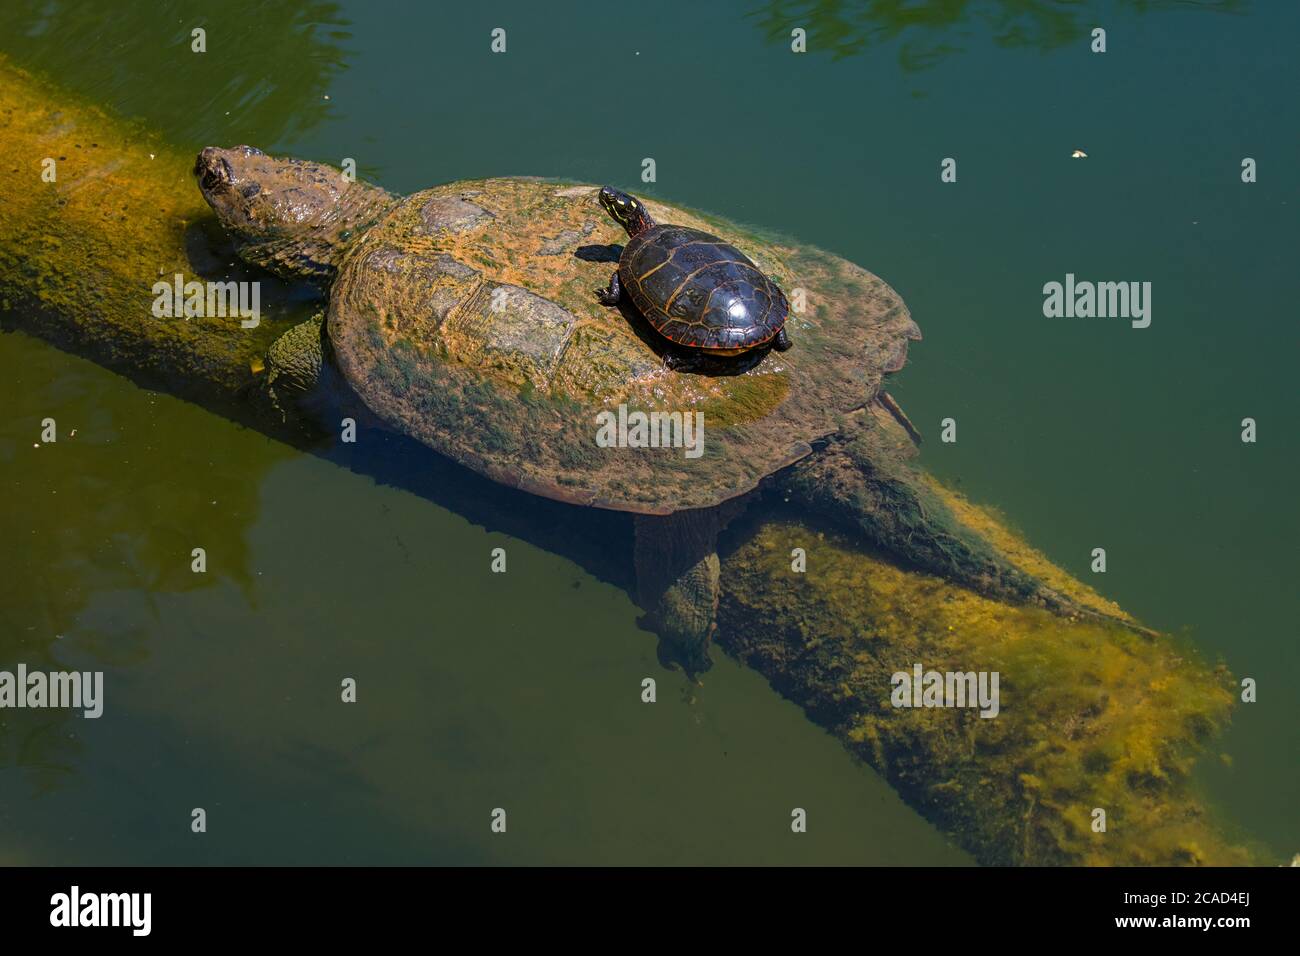 Snapping turtle, Chelydra serpentina, and painted turtle, Chrysemys picta, basking, Maryland Stock Photo